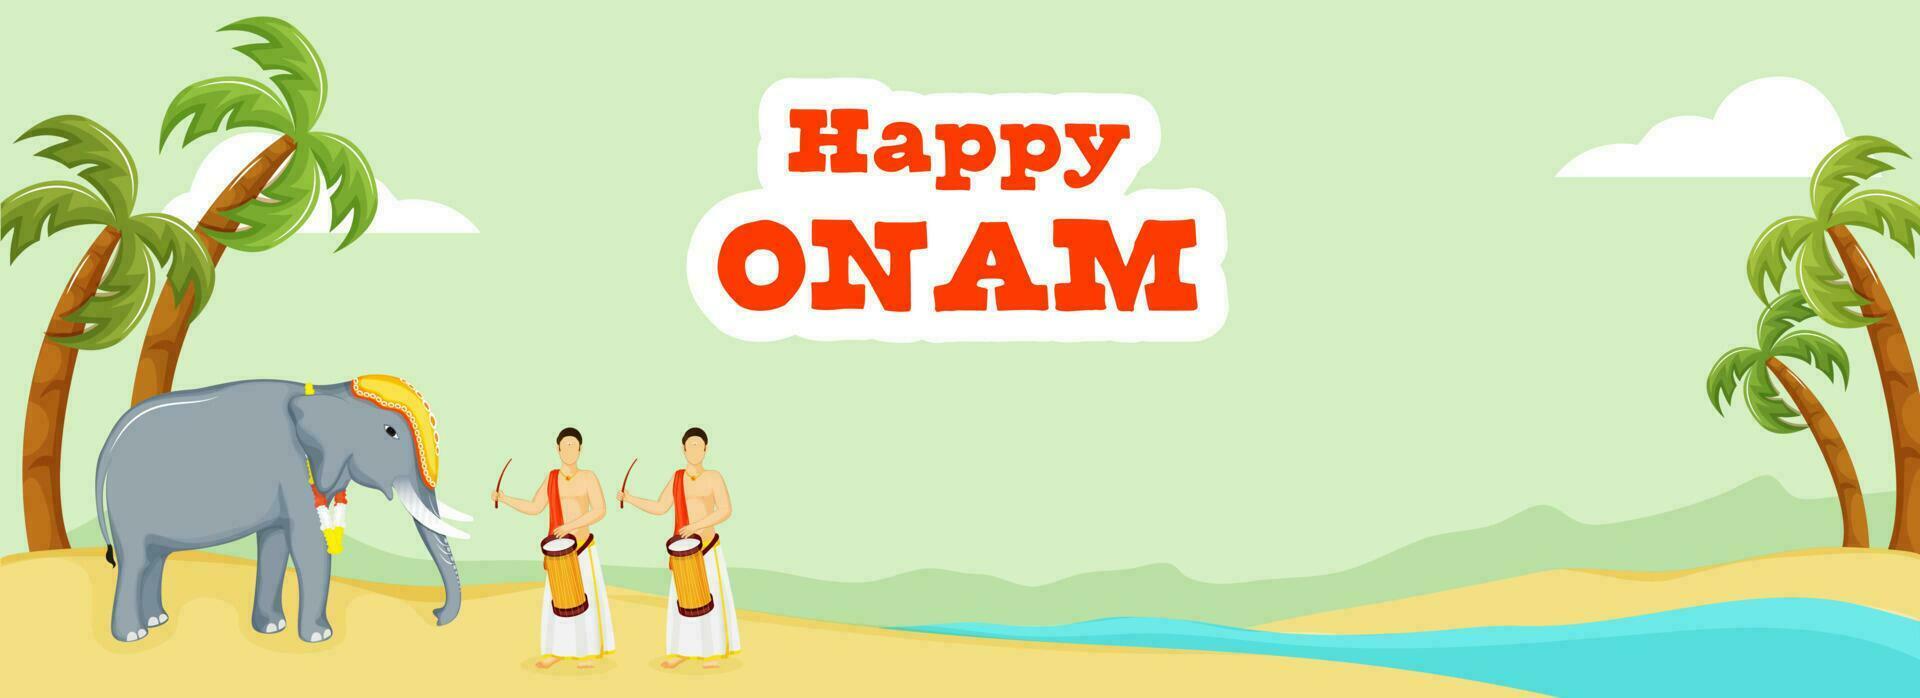 Sticker Style Happy Onam Lettering With South Indian Drummers, Elephant Animal, Coconut Or Palm Tree On Riverside Green And Yellow Background. vector